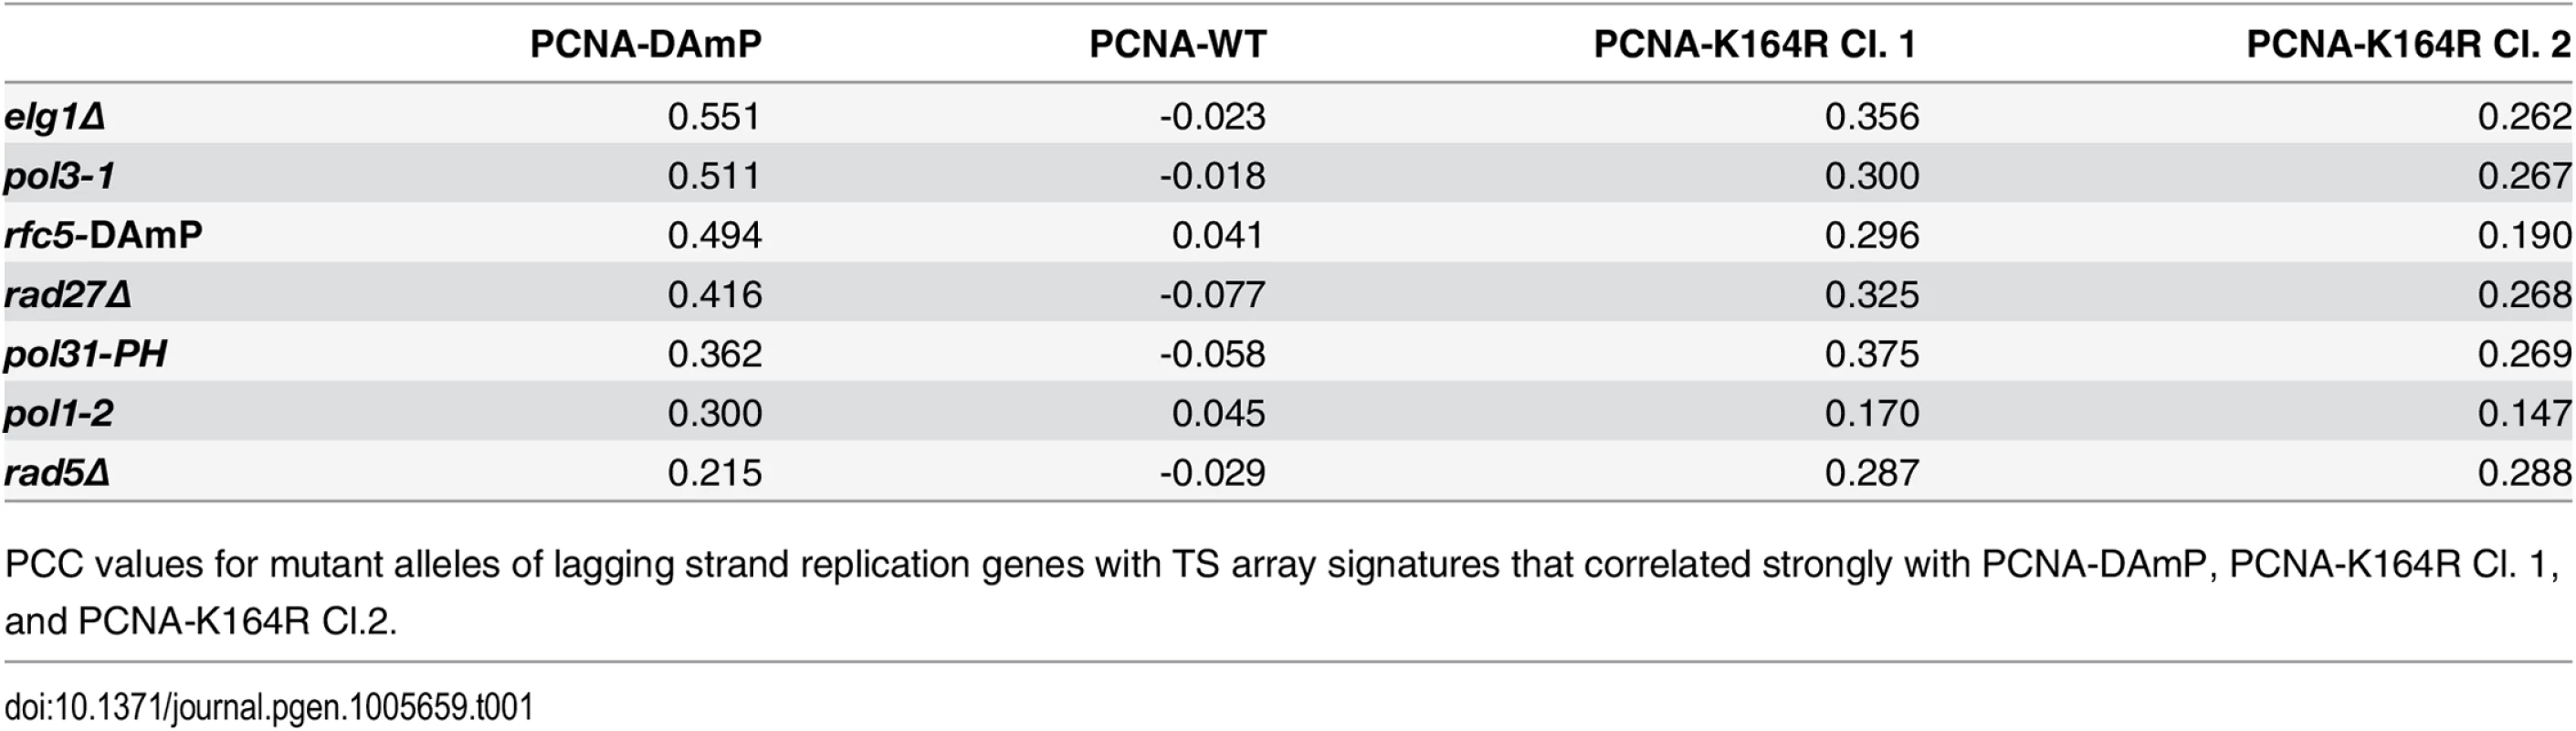 Lagging strand replication mutants that correlate strongly with PCNA-DAmP and PCNA-K164R.